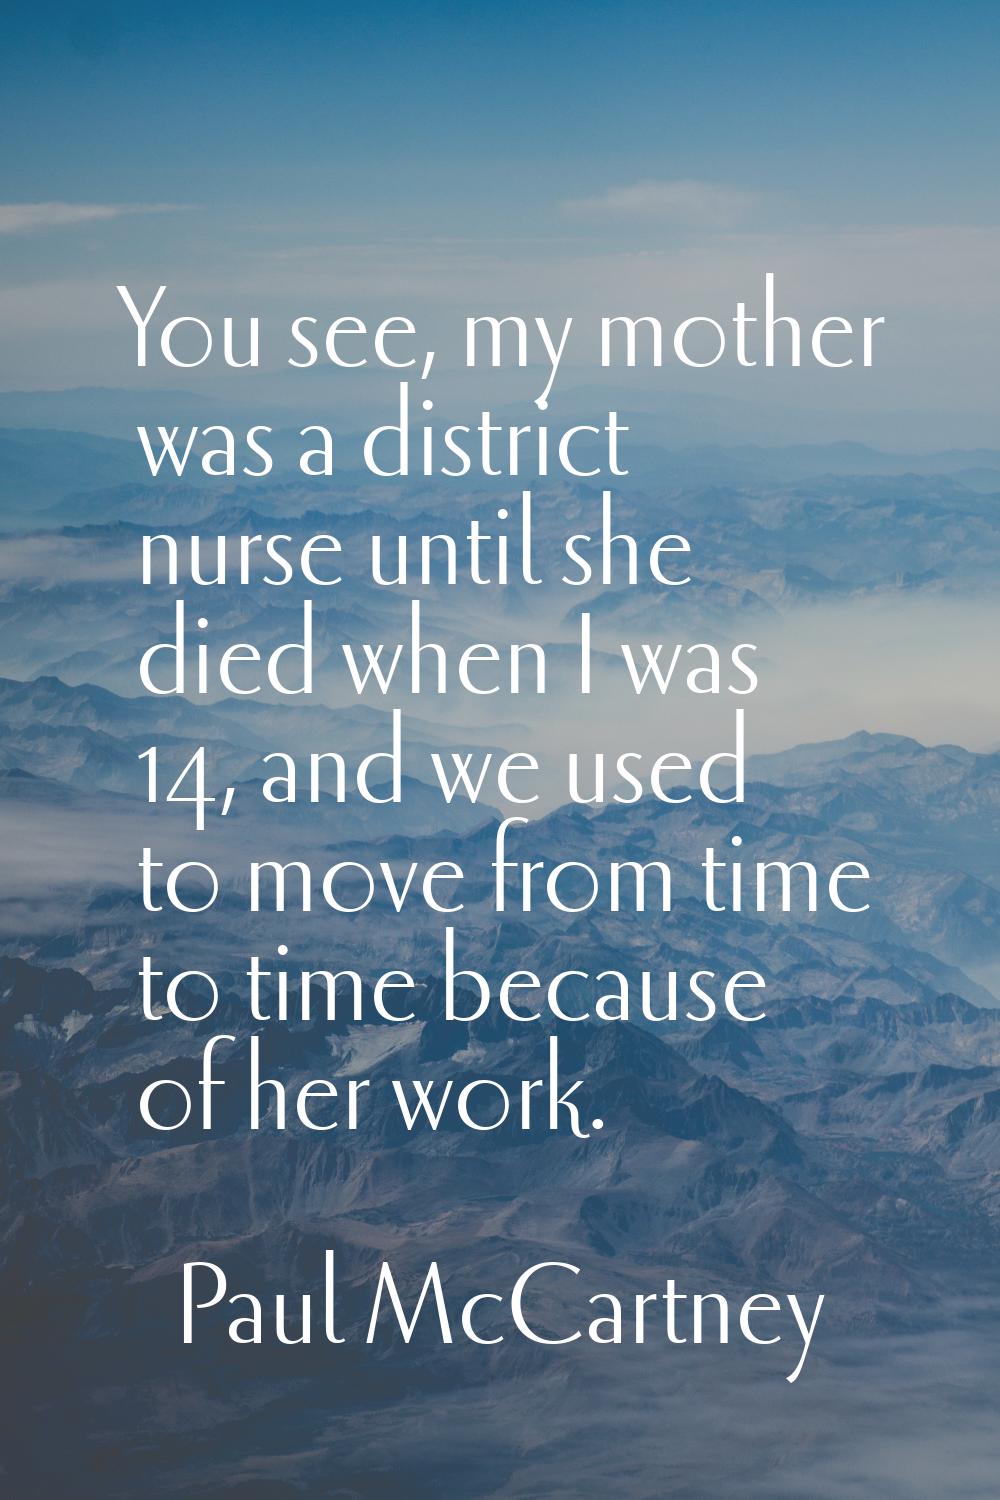 You see, my mother was a district nurse until she died when I was 14, and we used to move from time